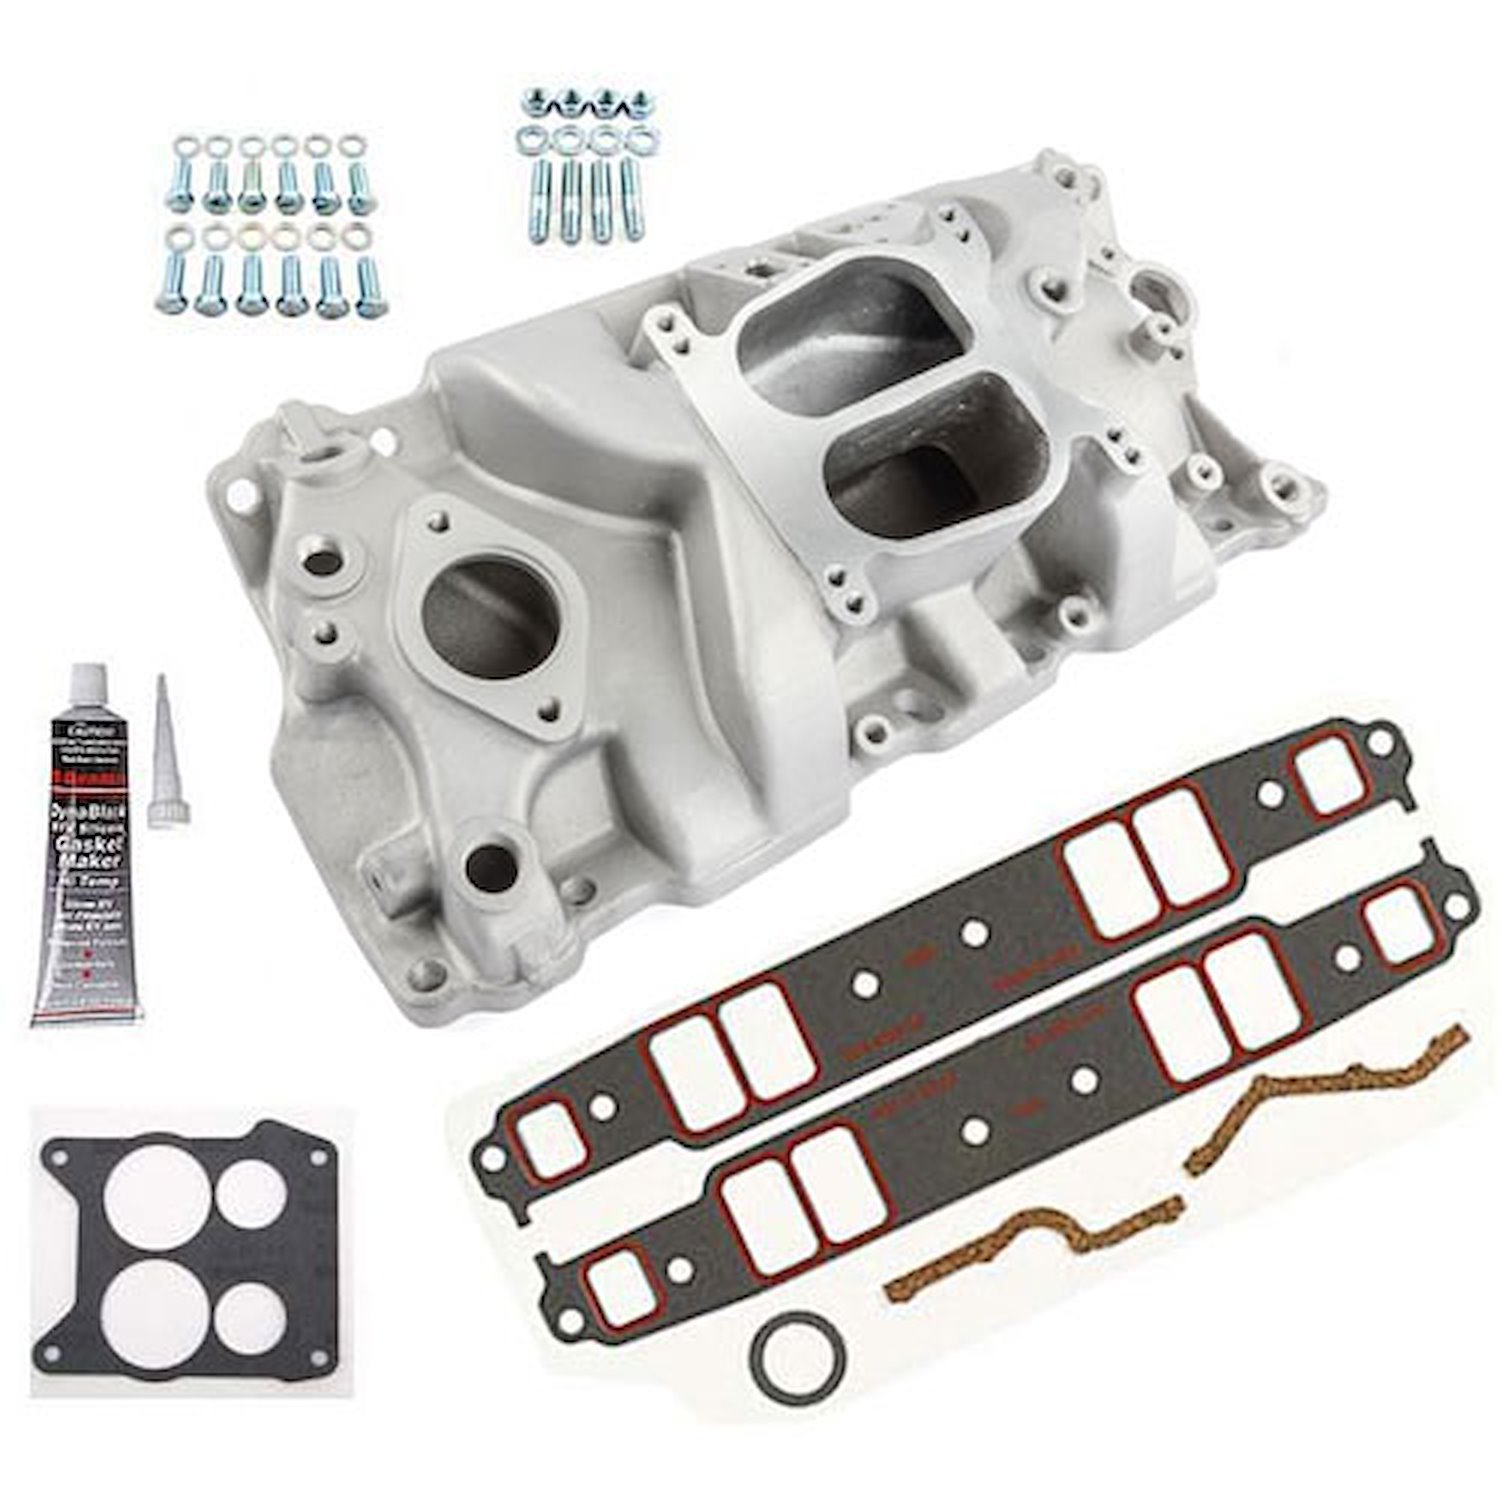 Holeshot Intake Kit 1957-95 Small Block Chevy 350 Includes: